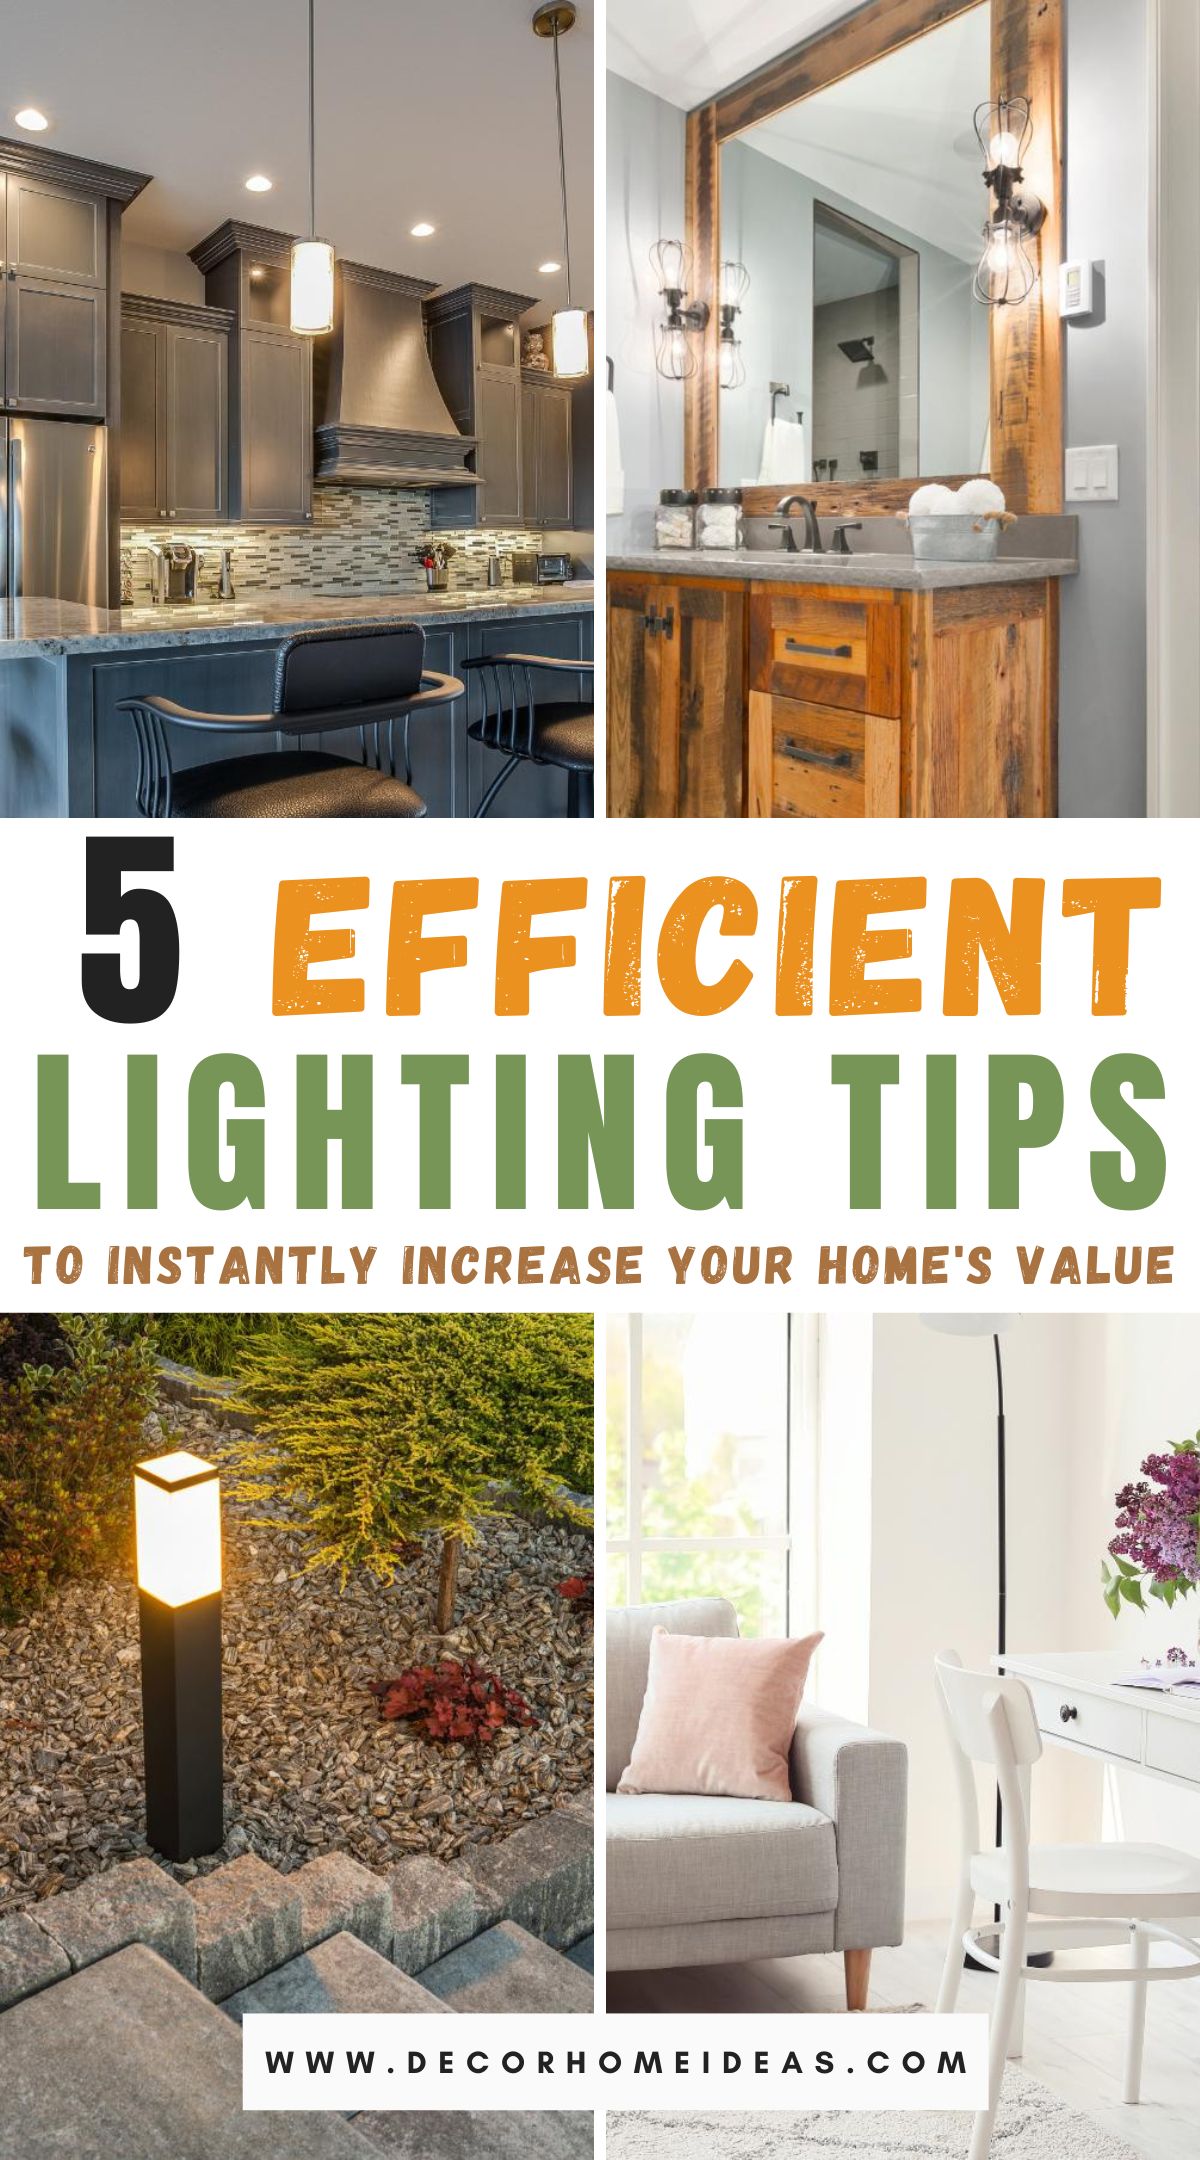 Boost your home's value with these 5 efficient lighting tips. From strategic placement to energy-efficient fixtures, illuminate your space to create a welcoming ambiance and enhance its overall appeal.